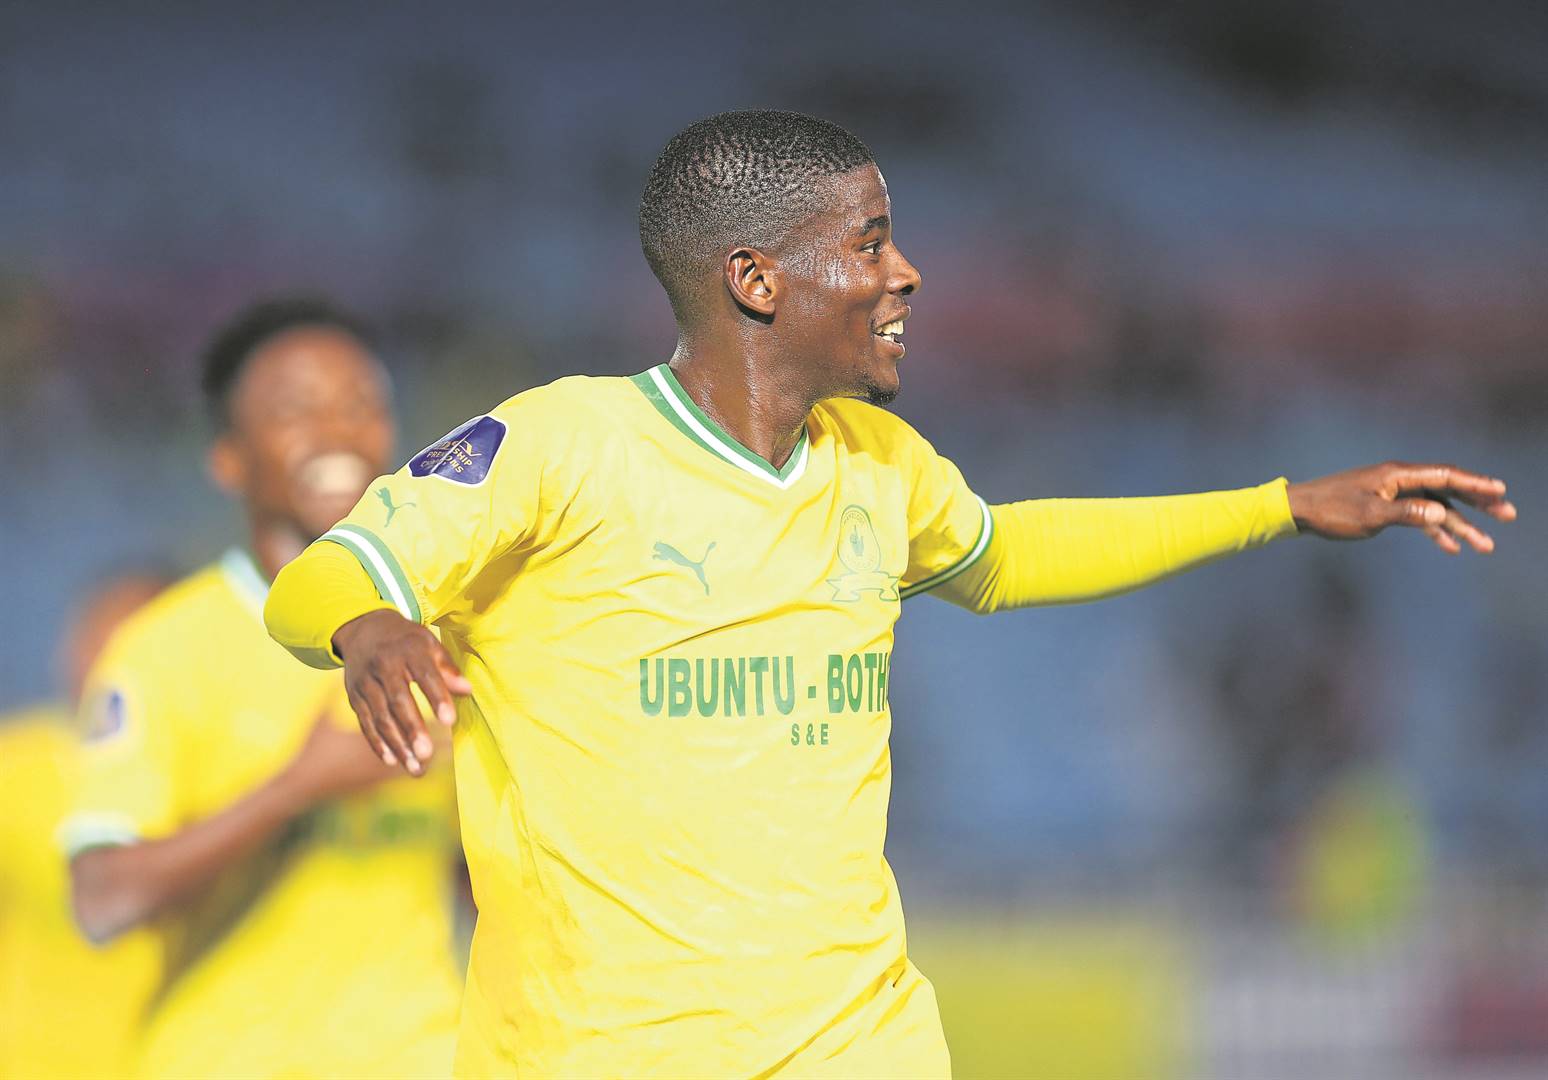 Neo Maema has sent out a loud message about the plan of action for Mamelodi Sundowns in the league this season